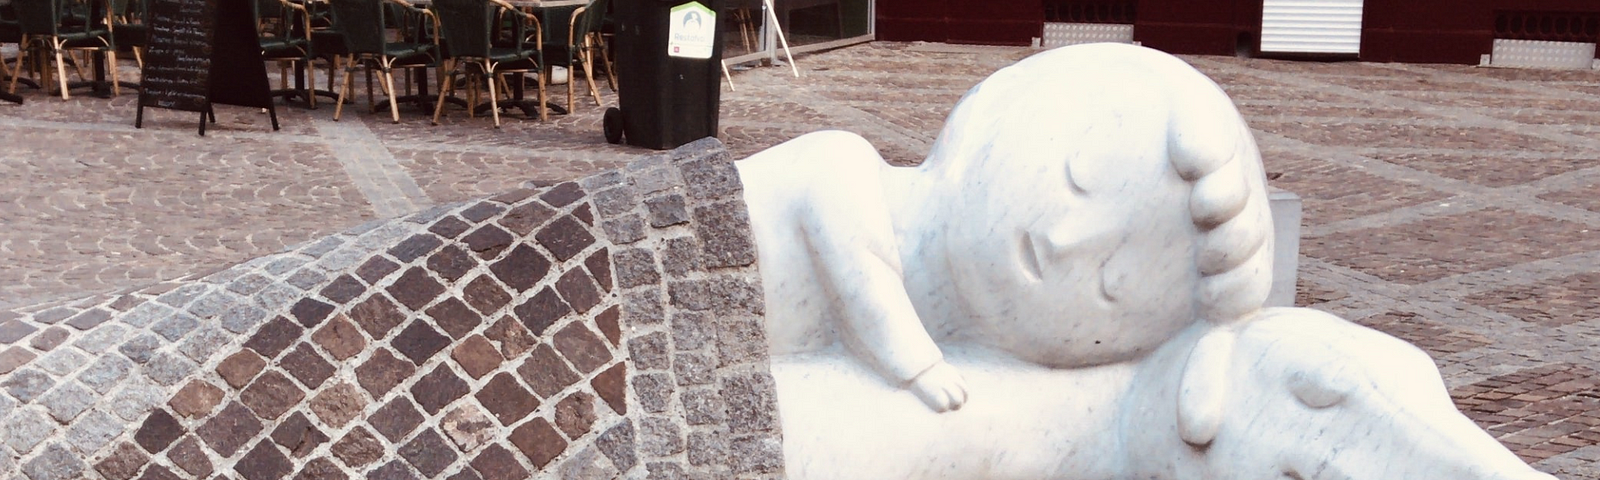 Reclining white statues of larger than life-size child and dog sleeping, with the paved ground as bedcovers.